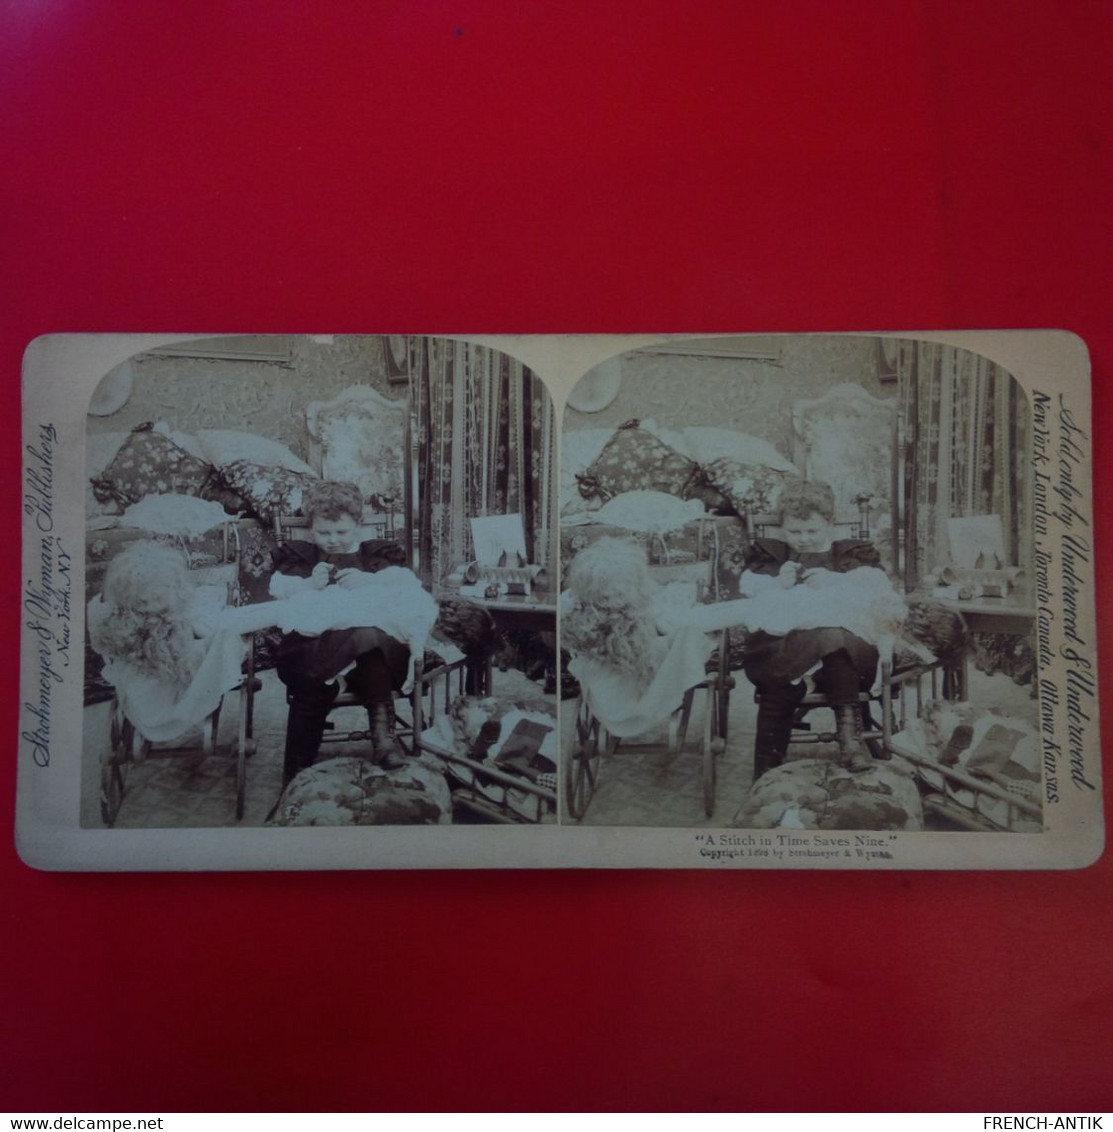 PHOTO STEREO A STITCH IN TIME SAVES NINE - Stereo-Photographie